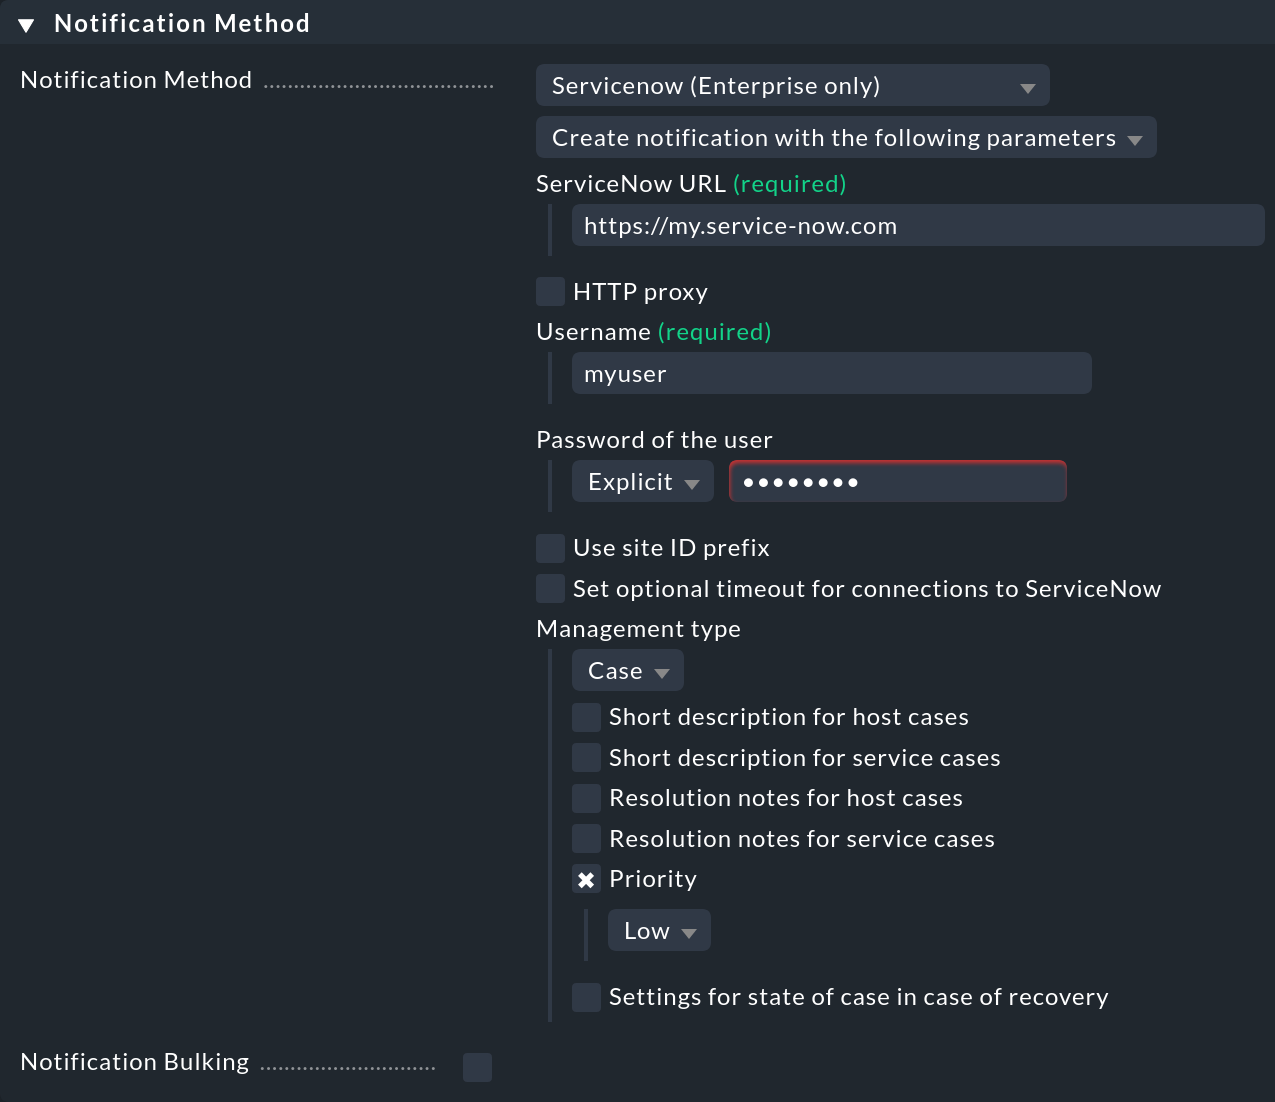 The notification method settings for Case type in ServiceNow.